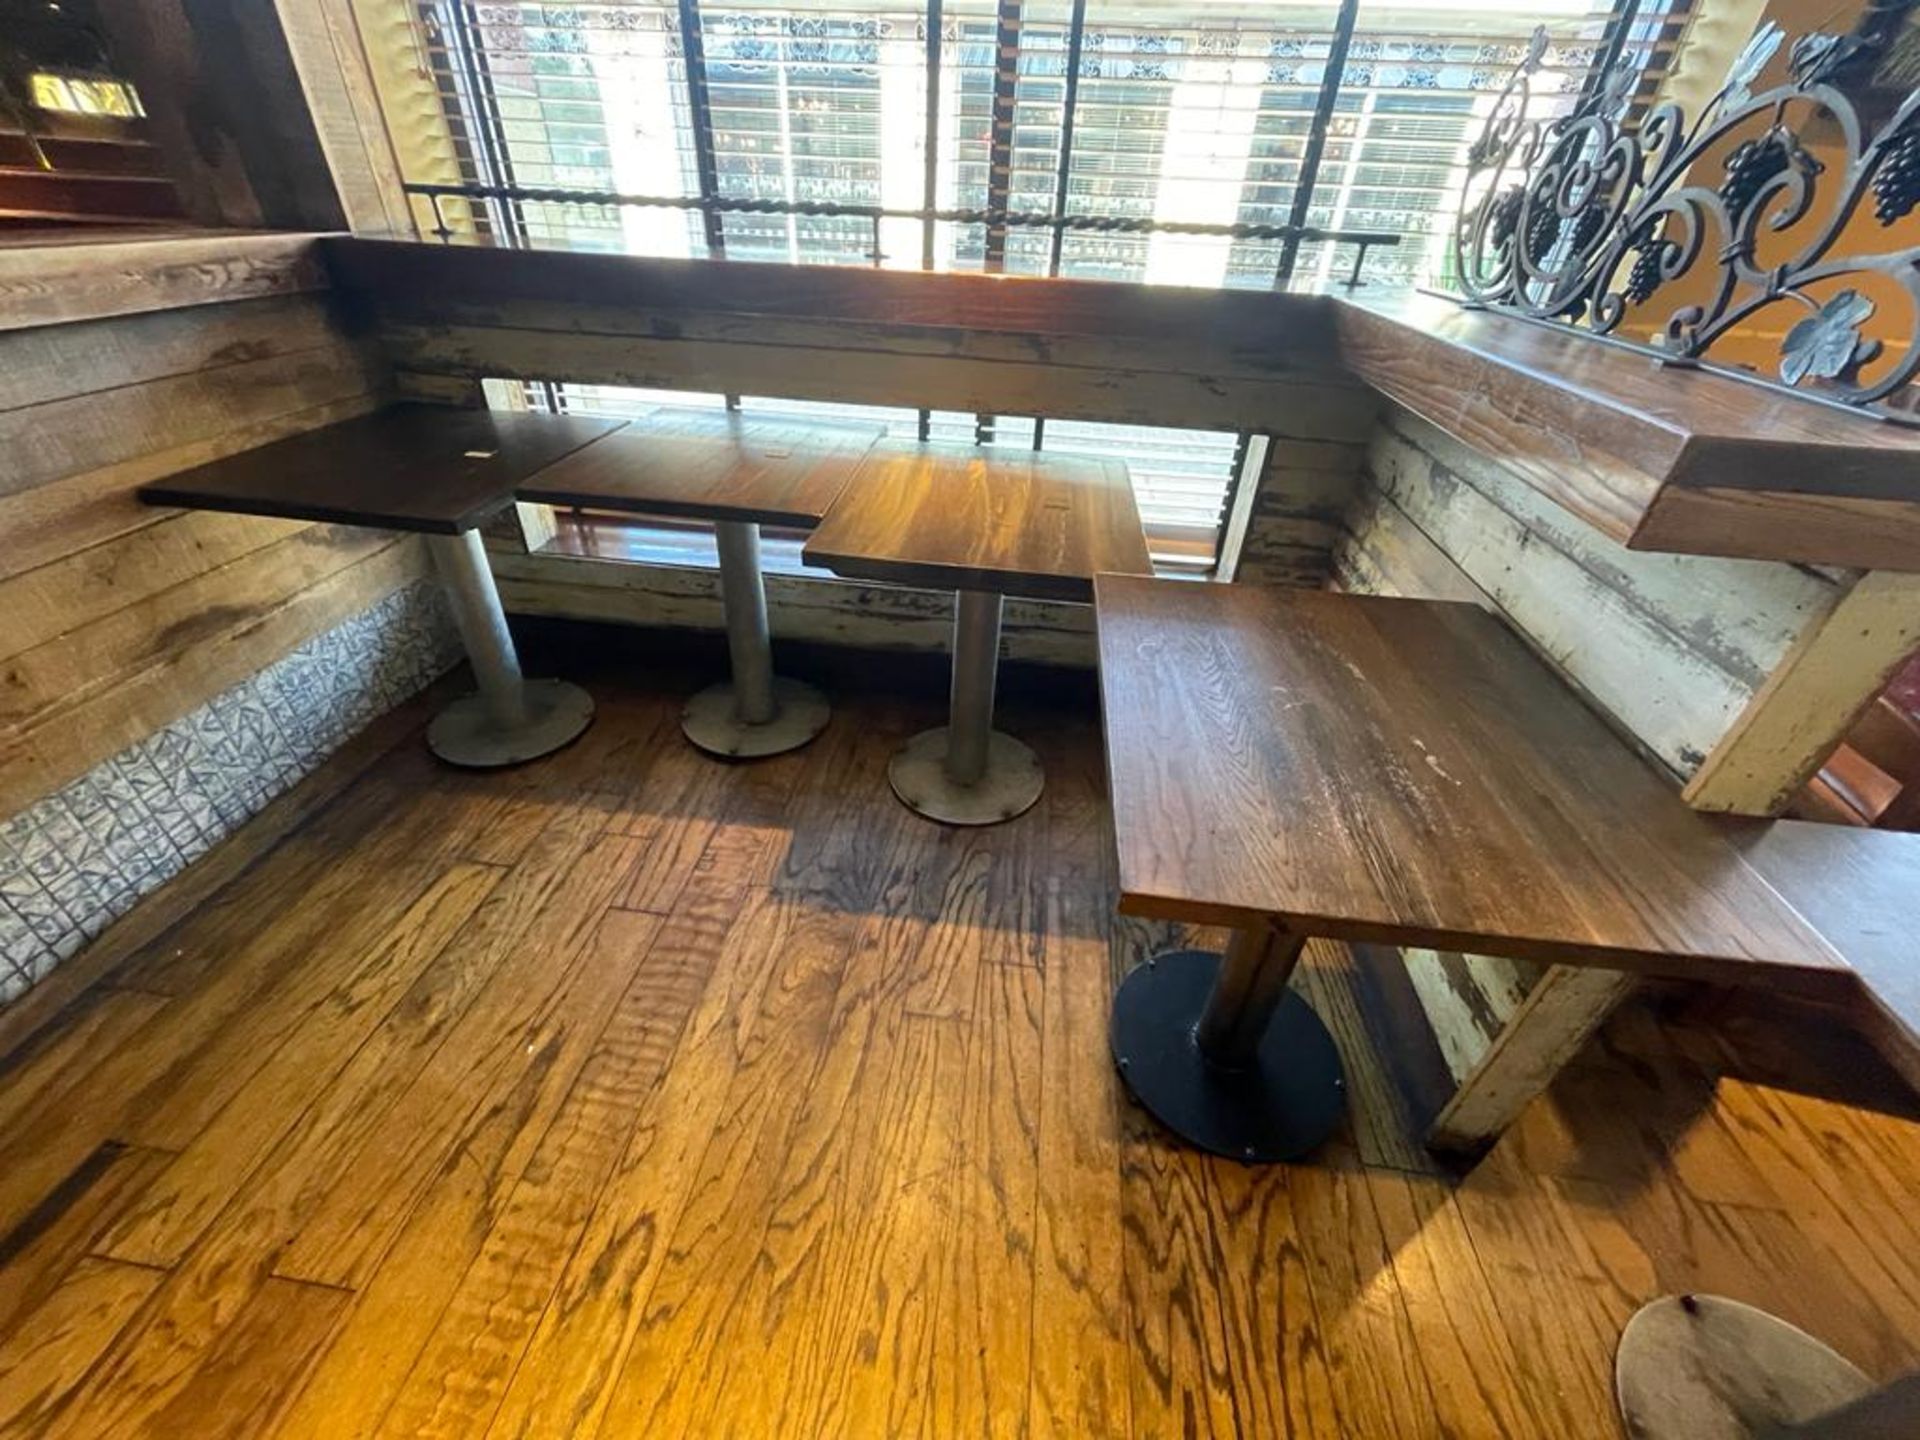 6 x Restaurant Dining Tables Featuring Industrial Style Bases and Wood Tops - Dimensions: H73 x - Image 7 of 9